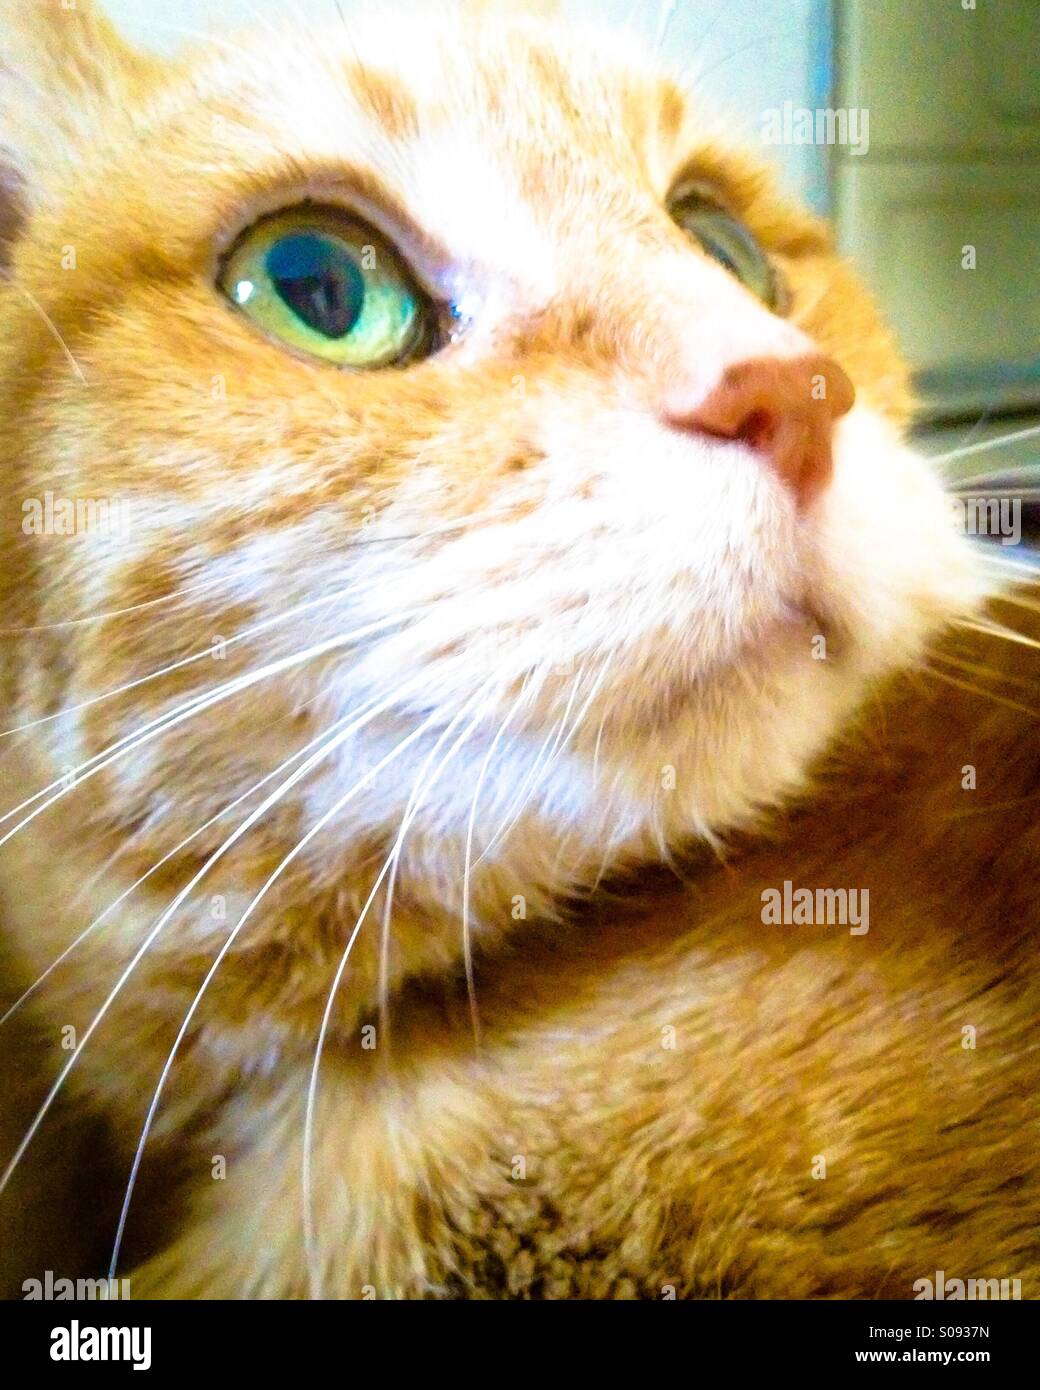 Older orange tabby cat looking up with bright green eyes. Stock Photo